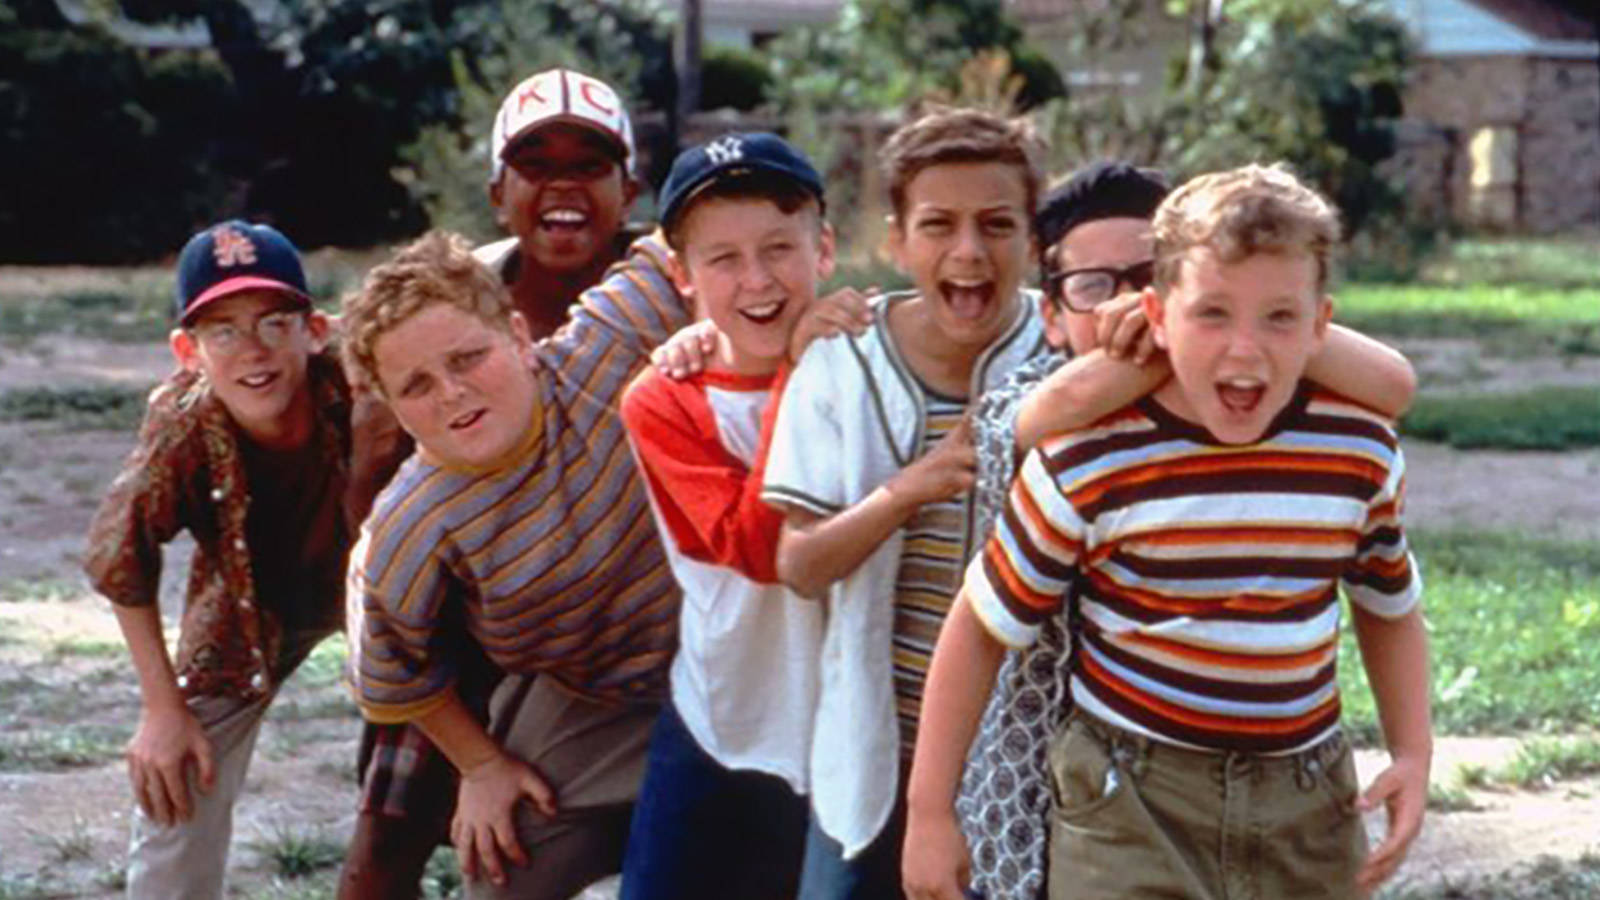 The Little League, the boys from The Sandlot come together to play. Wallpaper